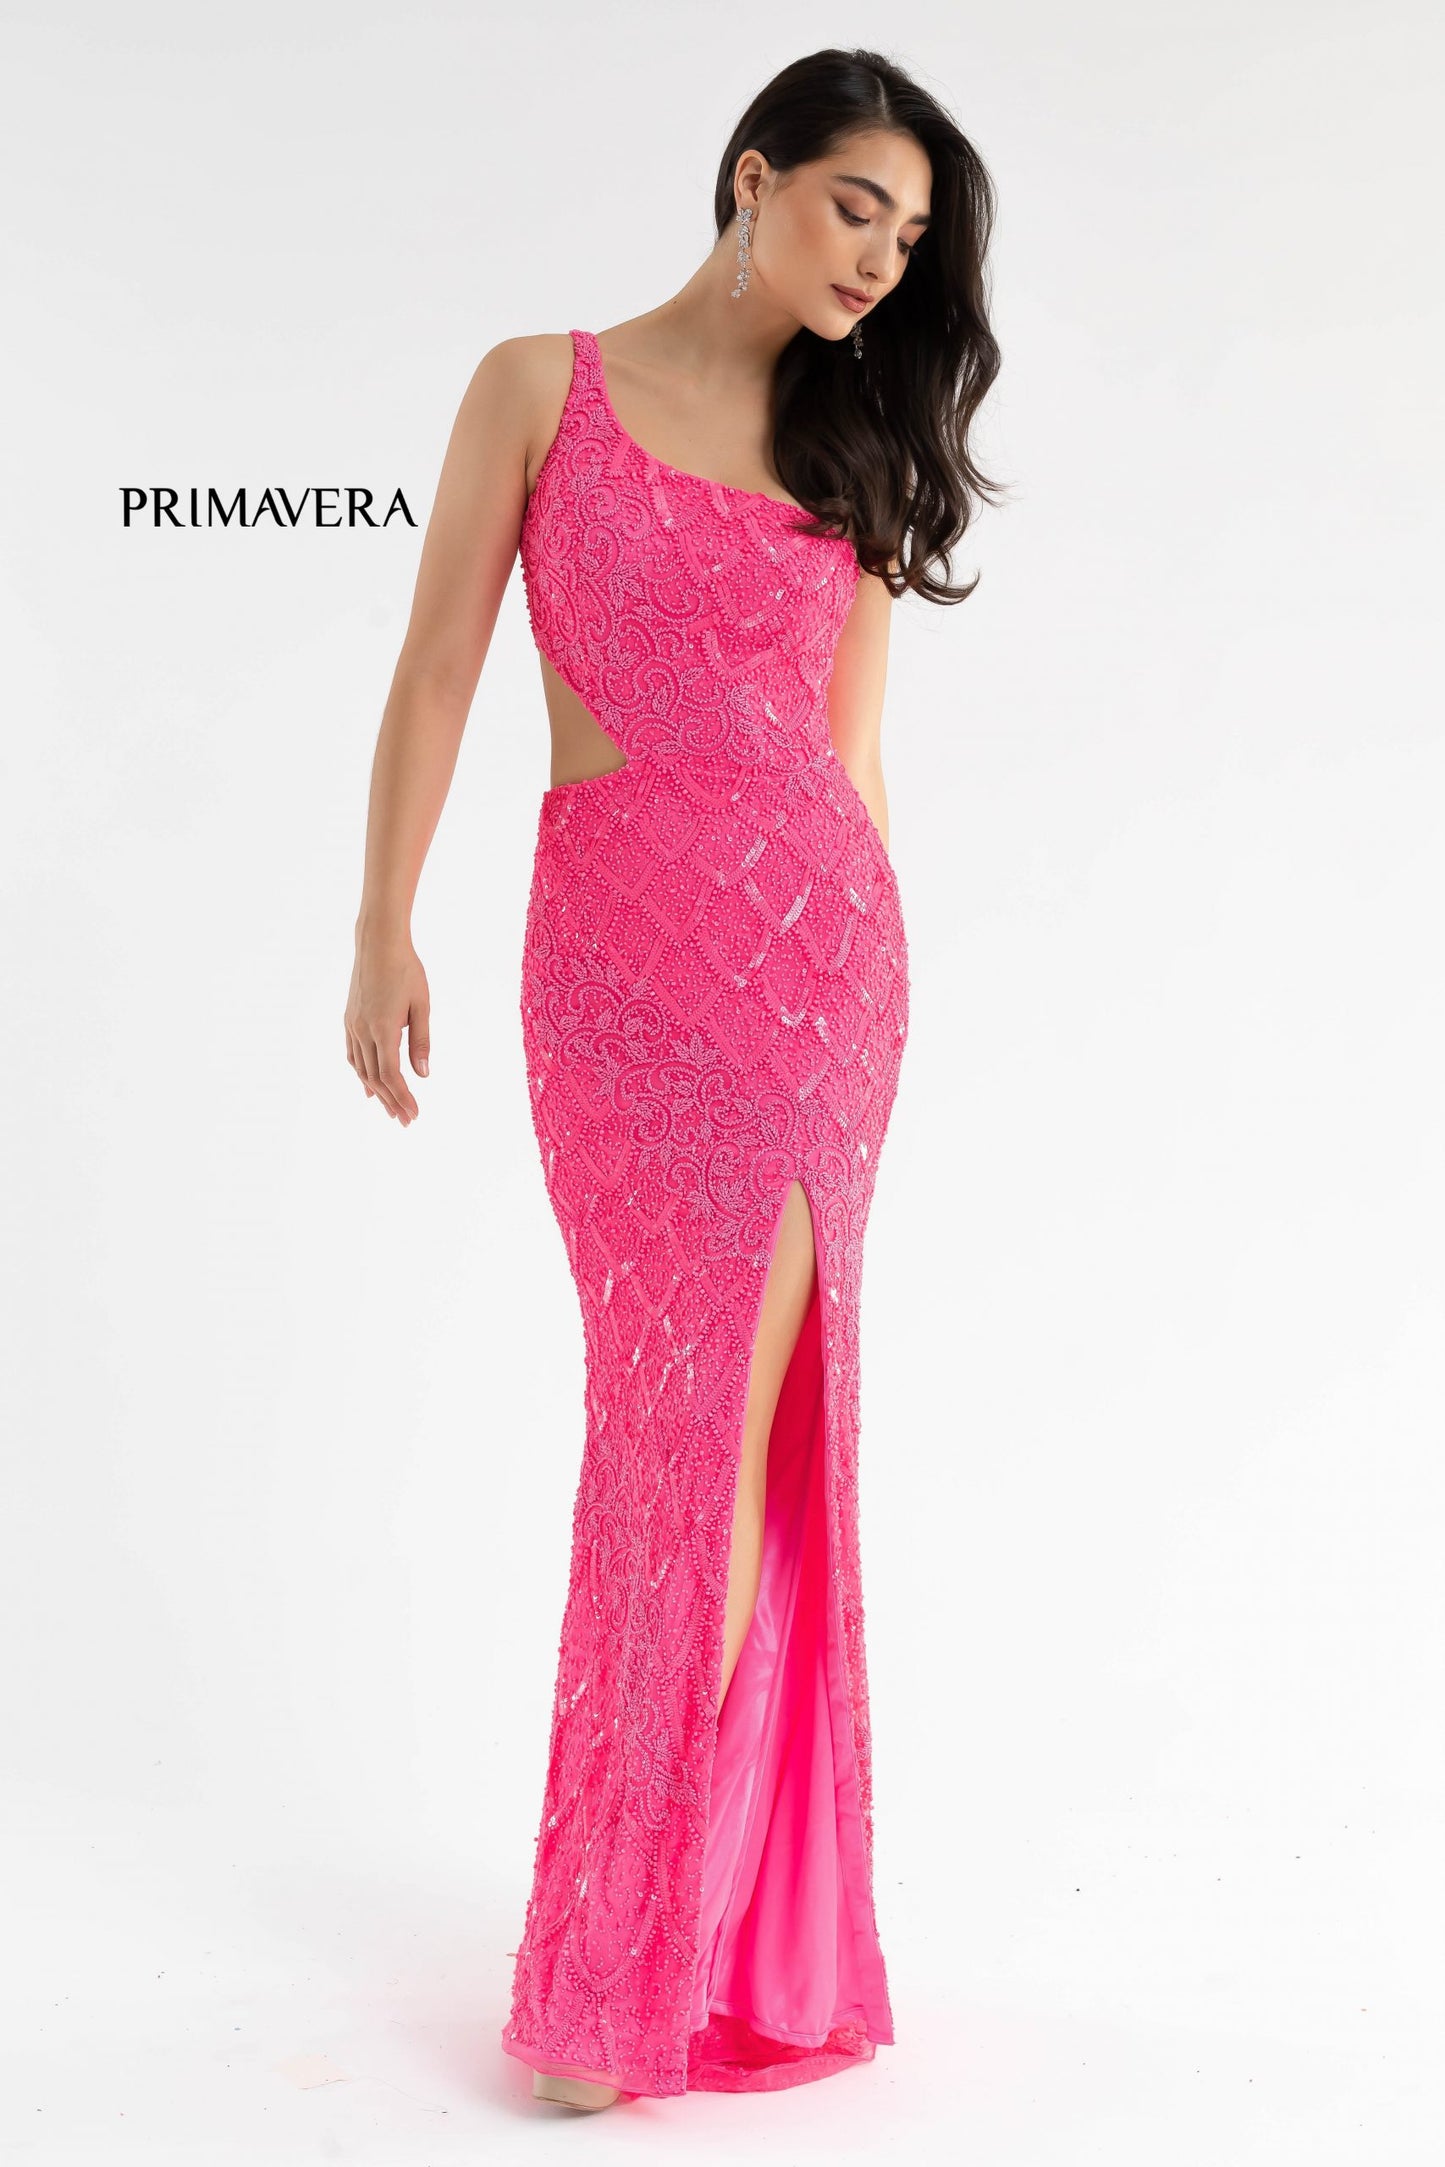 Primavera Couture 3729 This iridescent prom dress is sure to stand out in a crowd.  With its one shoulder design and side cutout, it makes an excellent choice for prom.  It ends with a slit and sweeping train.  Colors:  NEON PINK, NEON CORAL, SAGE GREEN, LIGHT TURQUOISE, BRIGHT BLUE, ORANGE, EMERALD, PURPLE, ROYAL BLUE, PINK, RASPBERRY, IVORY, GOLD, CHARCOAL, BLACK, RED  Sizes:  000, 00, 0, 2, 4, 6, 8, 10, 12, 14, 16, 18